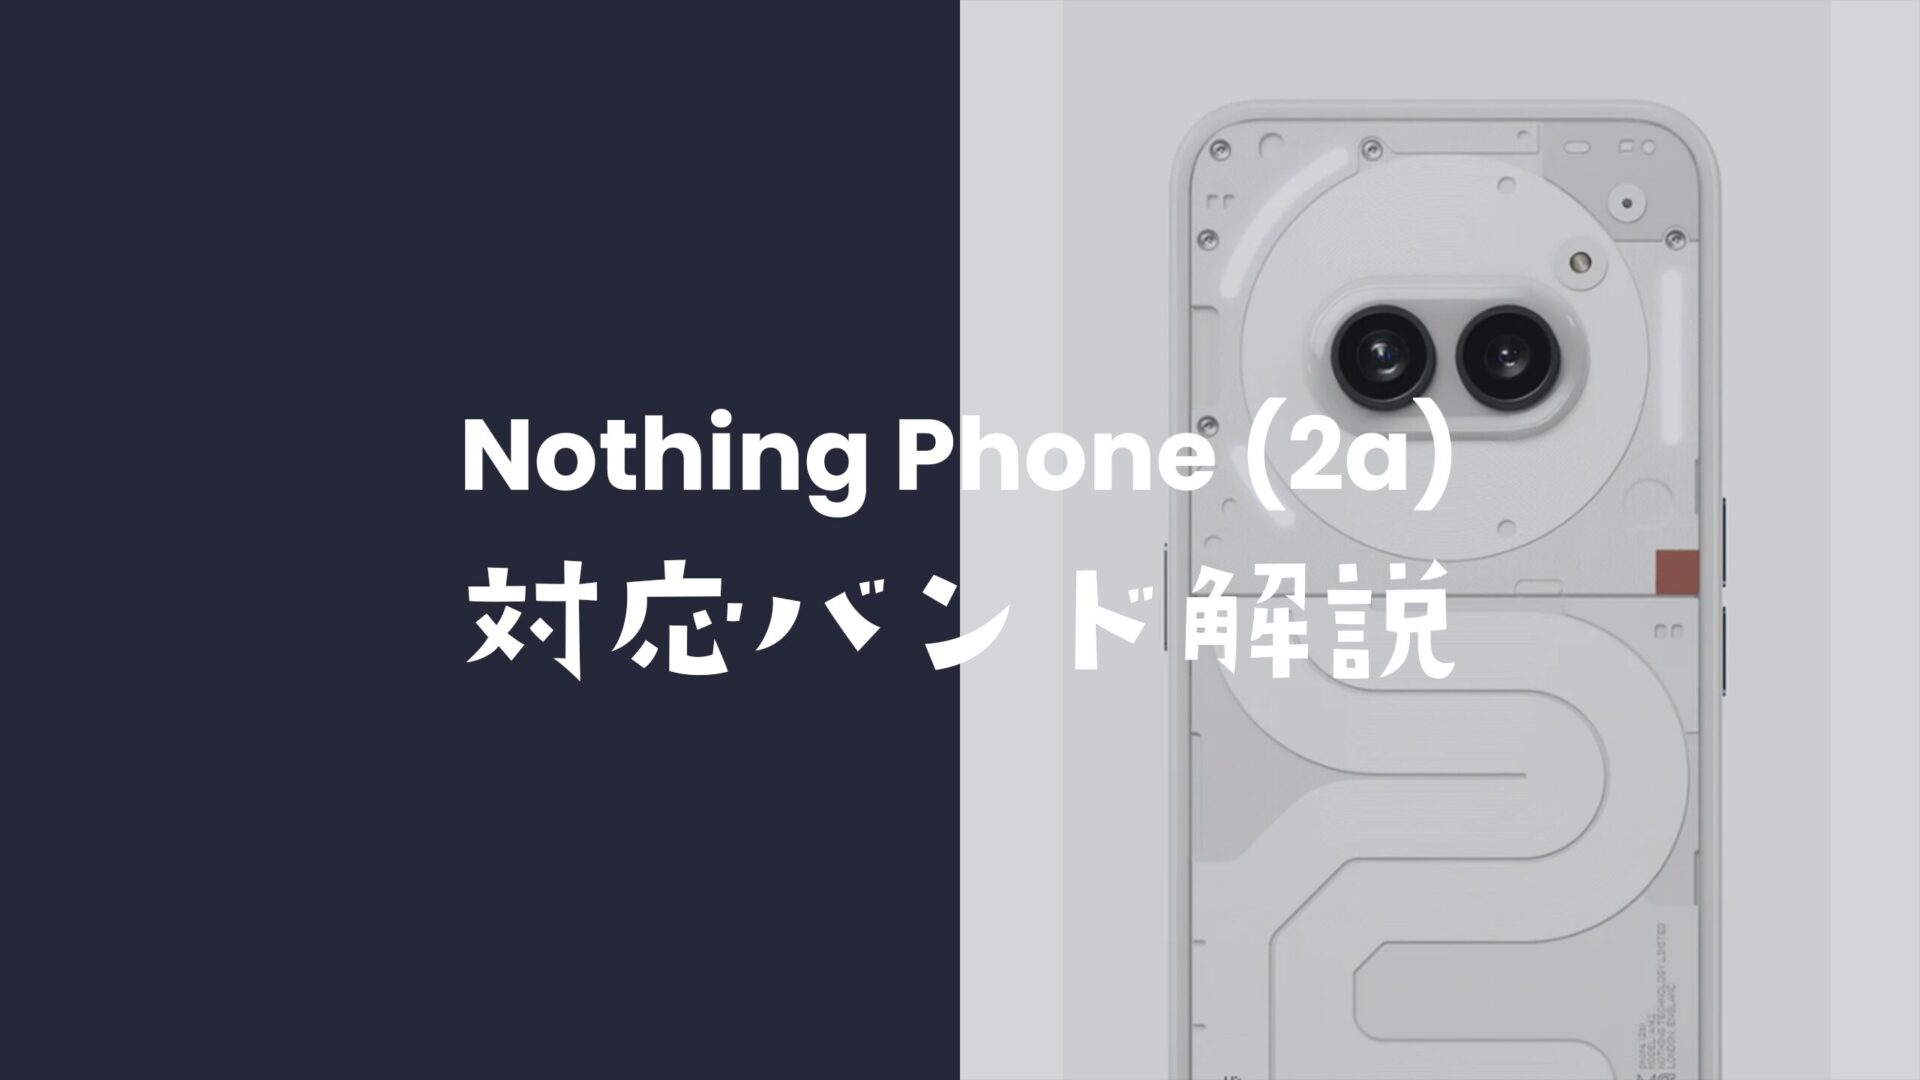 Nothing Phone (2a)の対応バンドを解説。のサムネイル画像